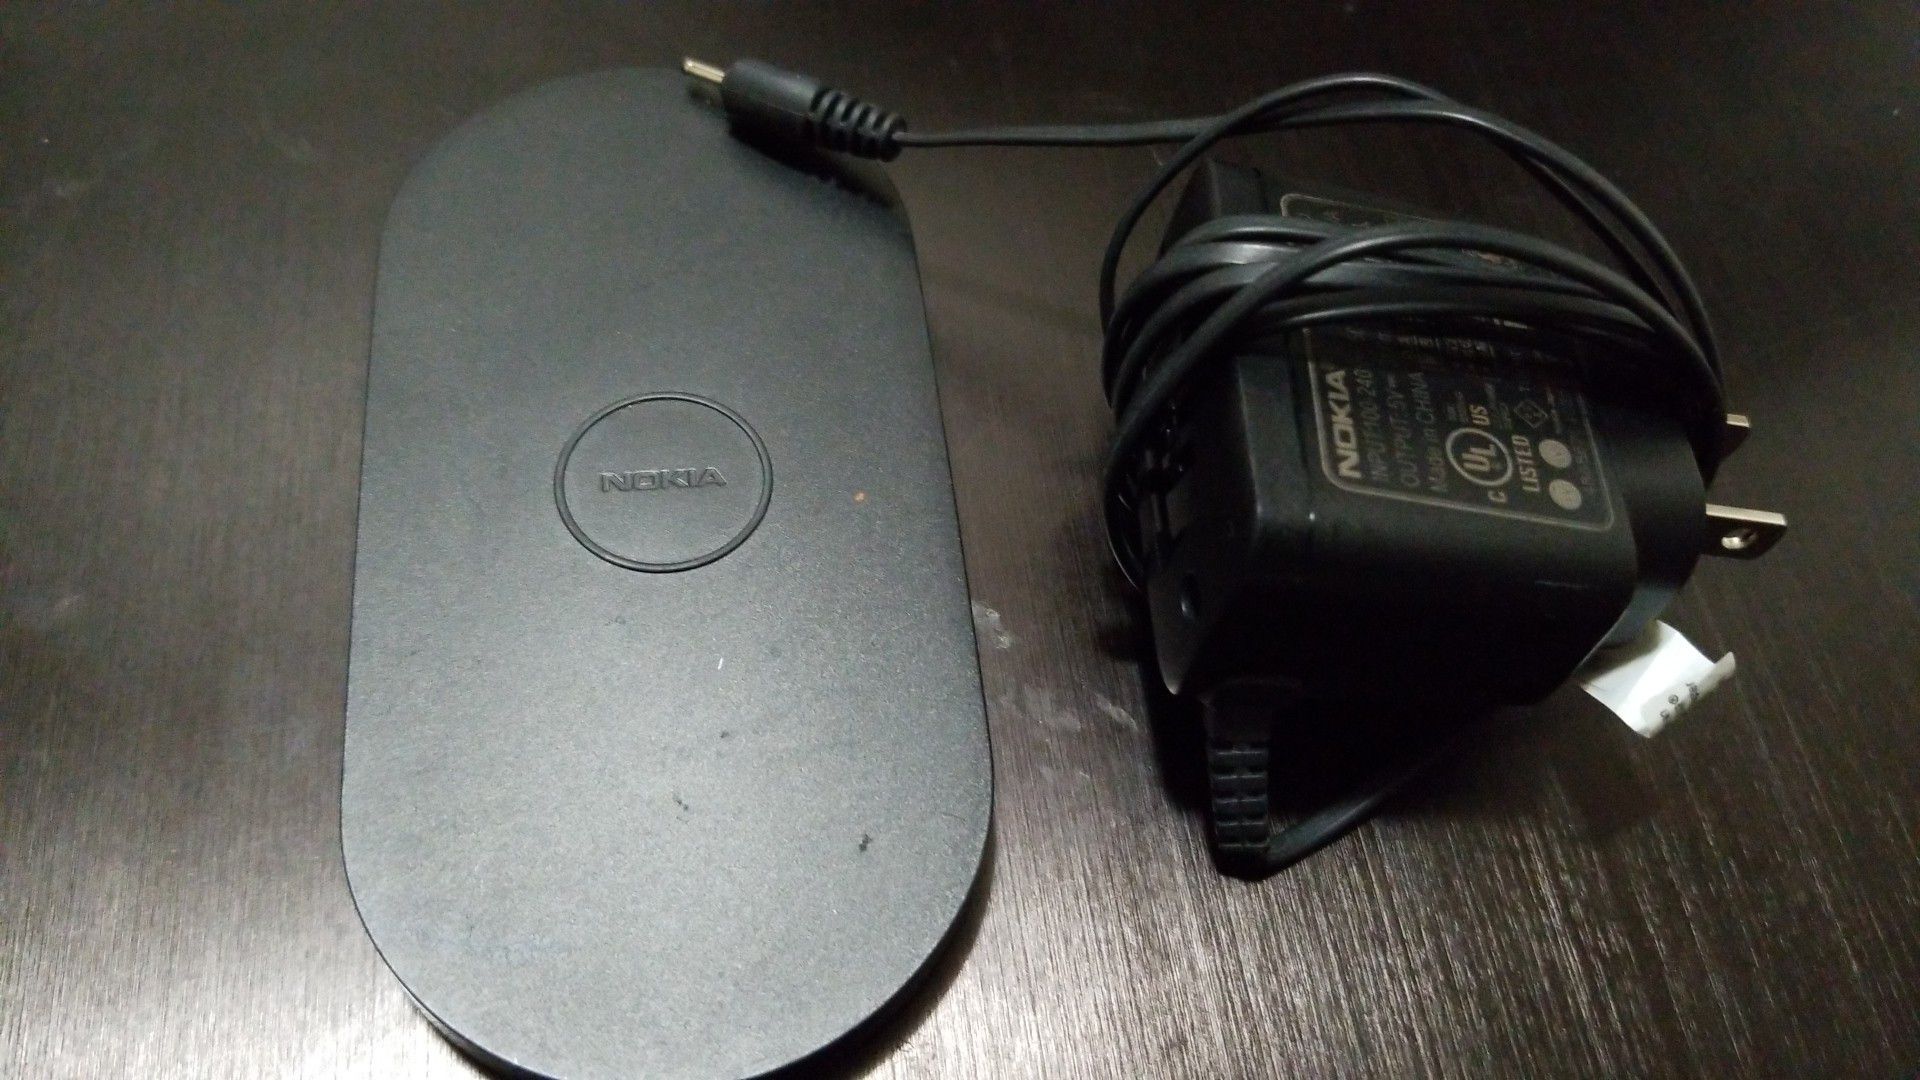 Nokia wireless charger